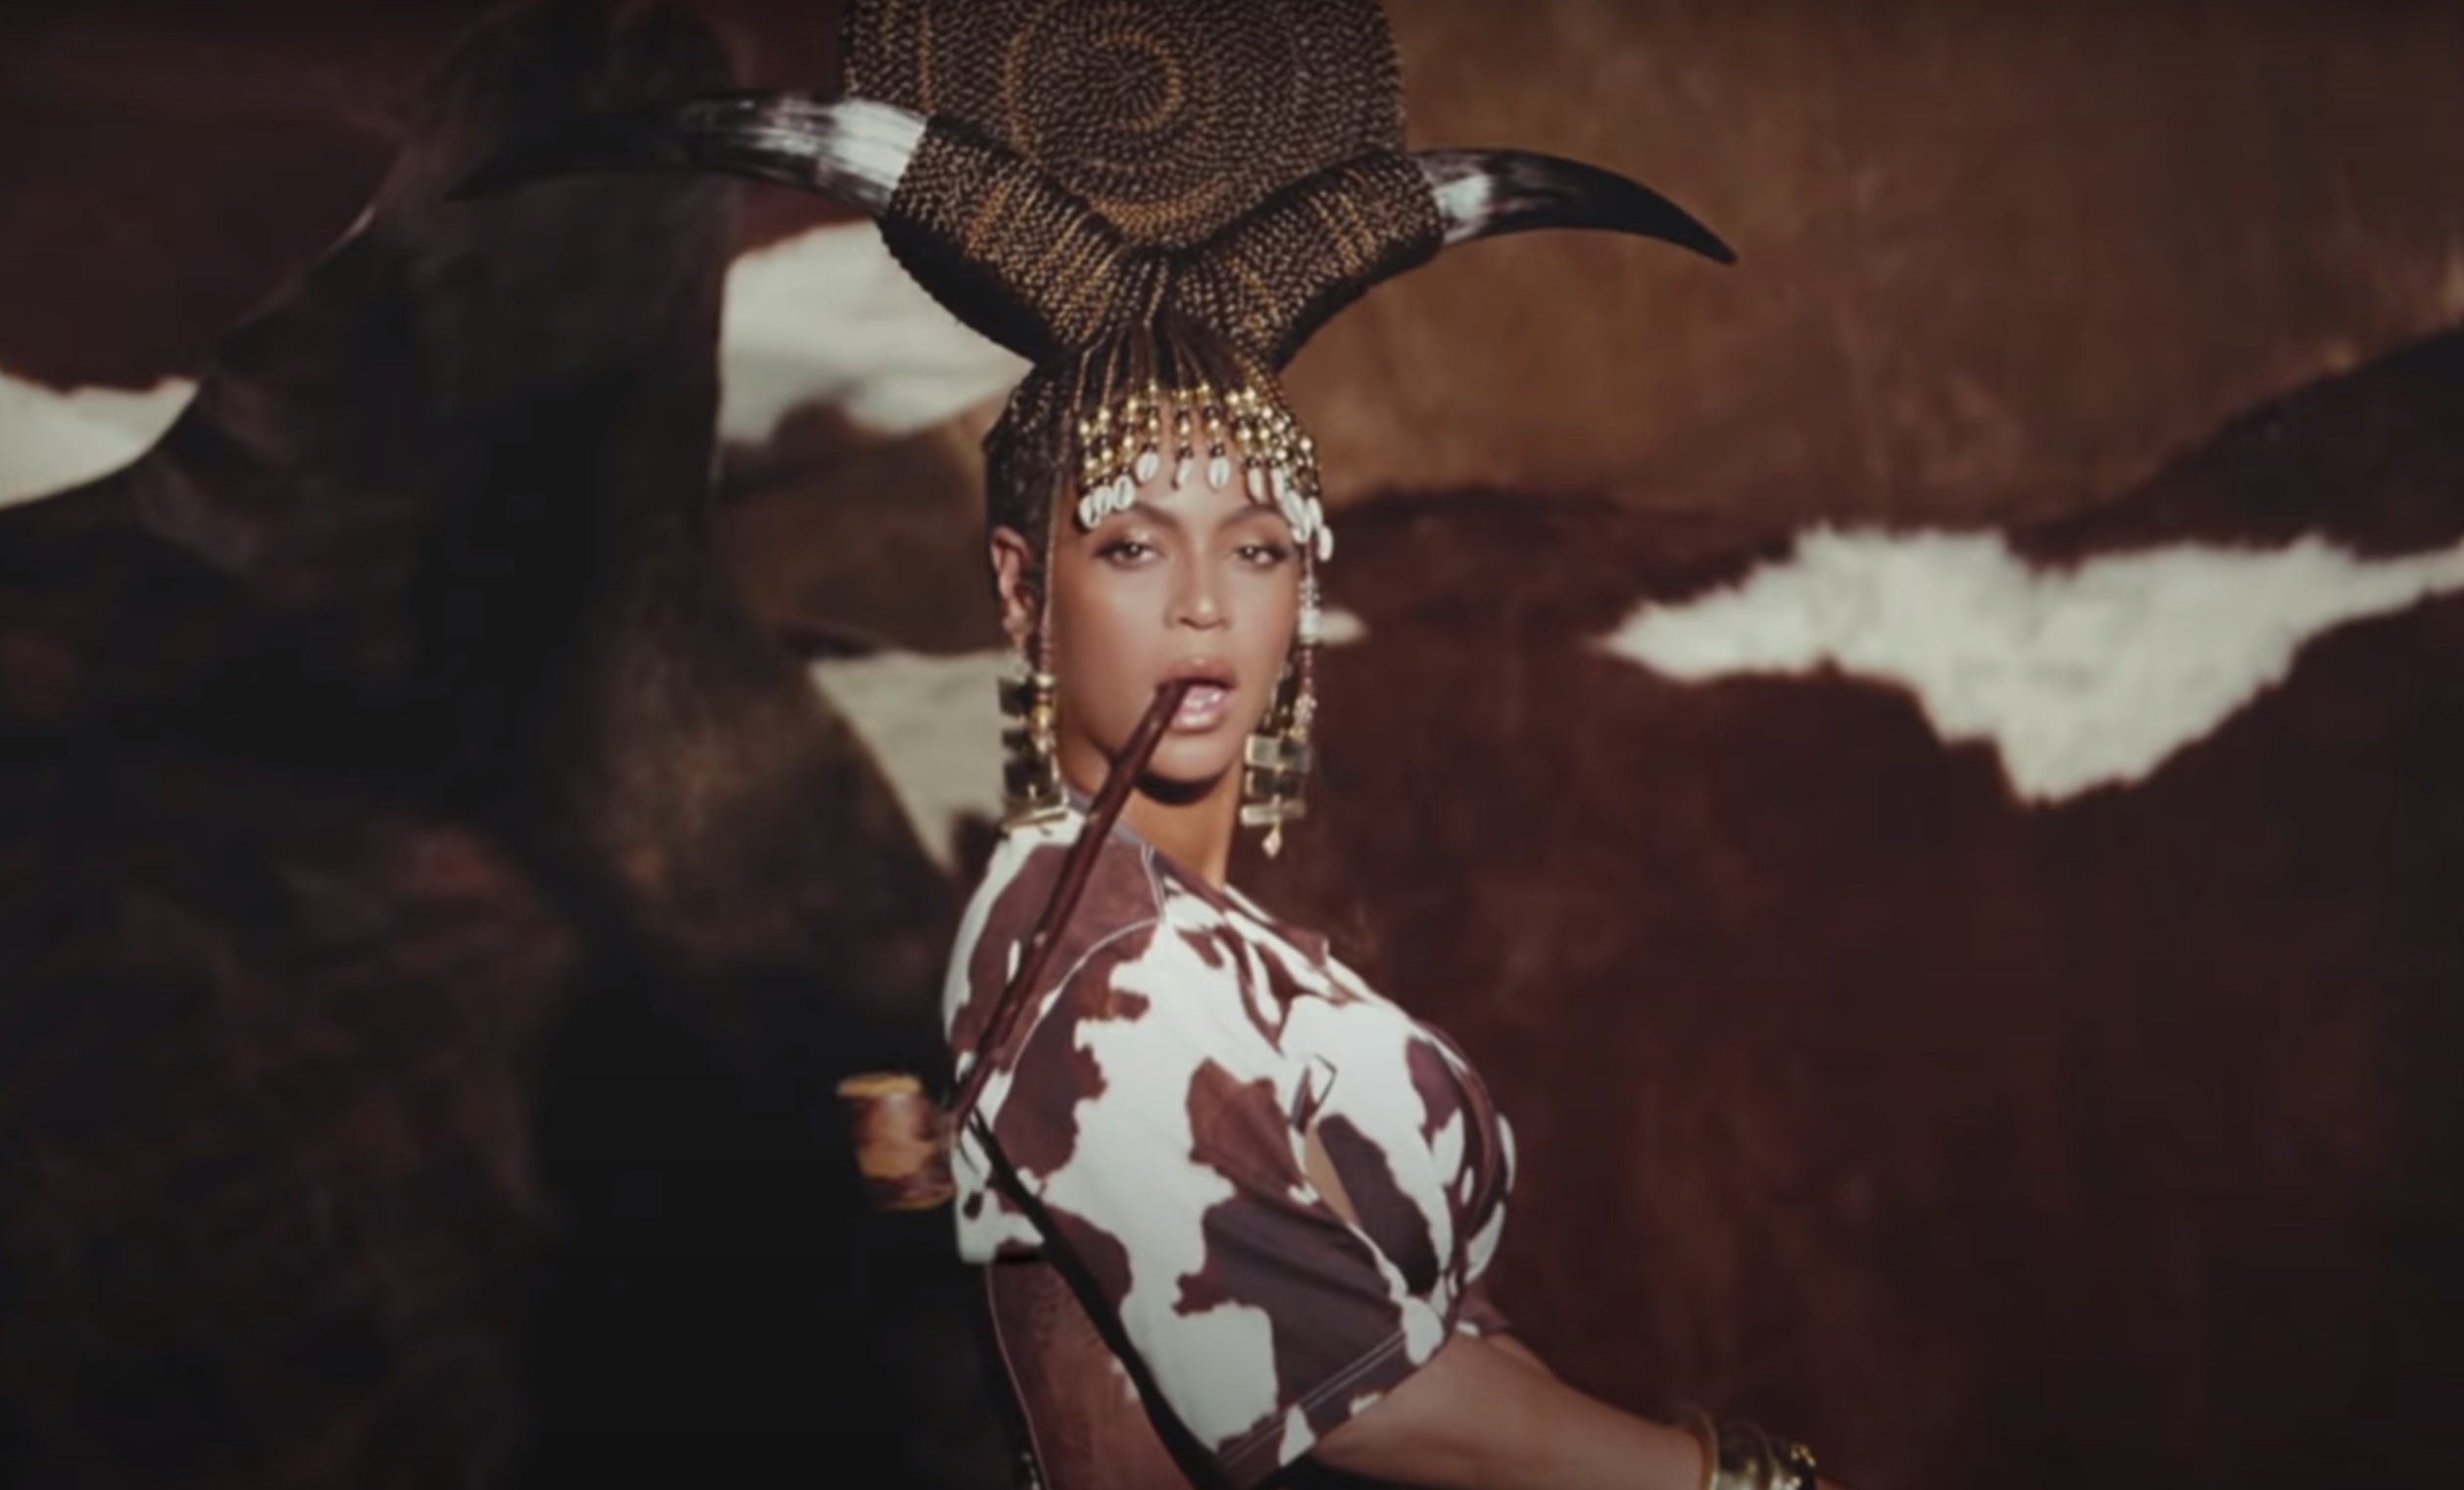 Beyoncé drops visuals for her gem "ALREADY" featuring Shatta Wale and Major Lazer